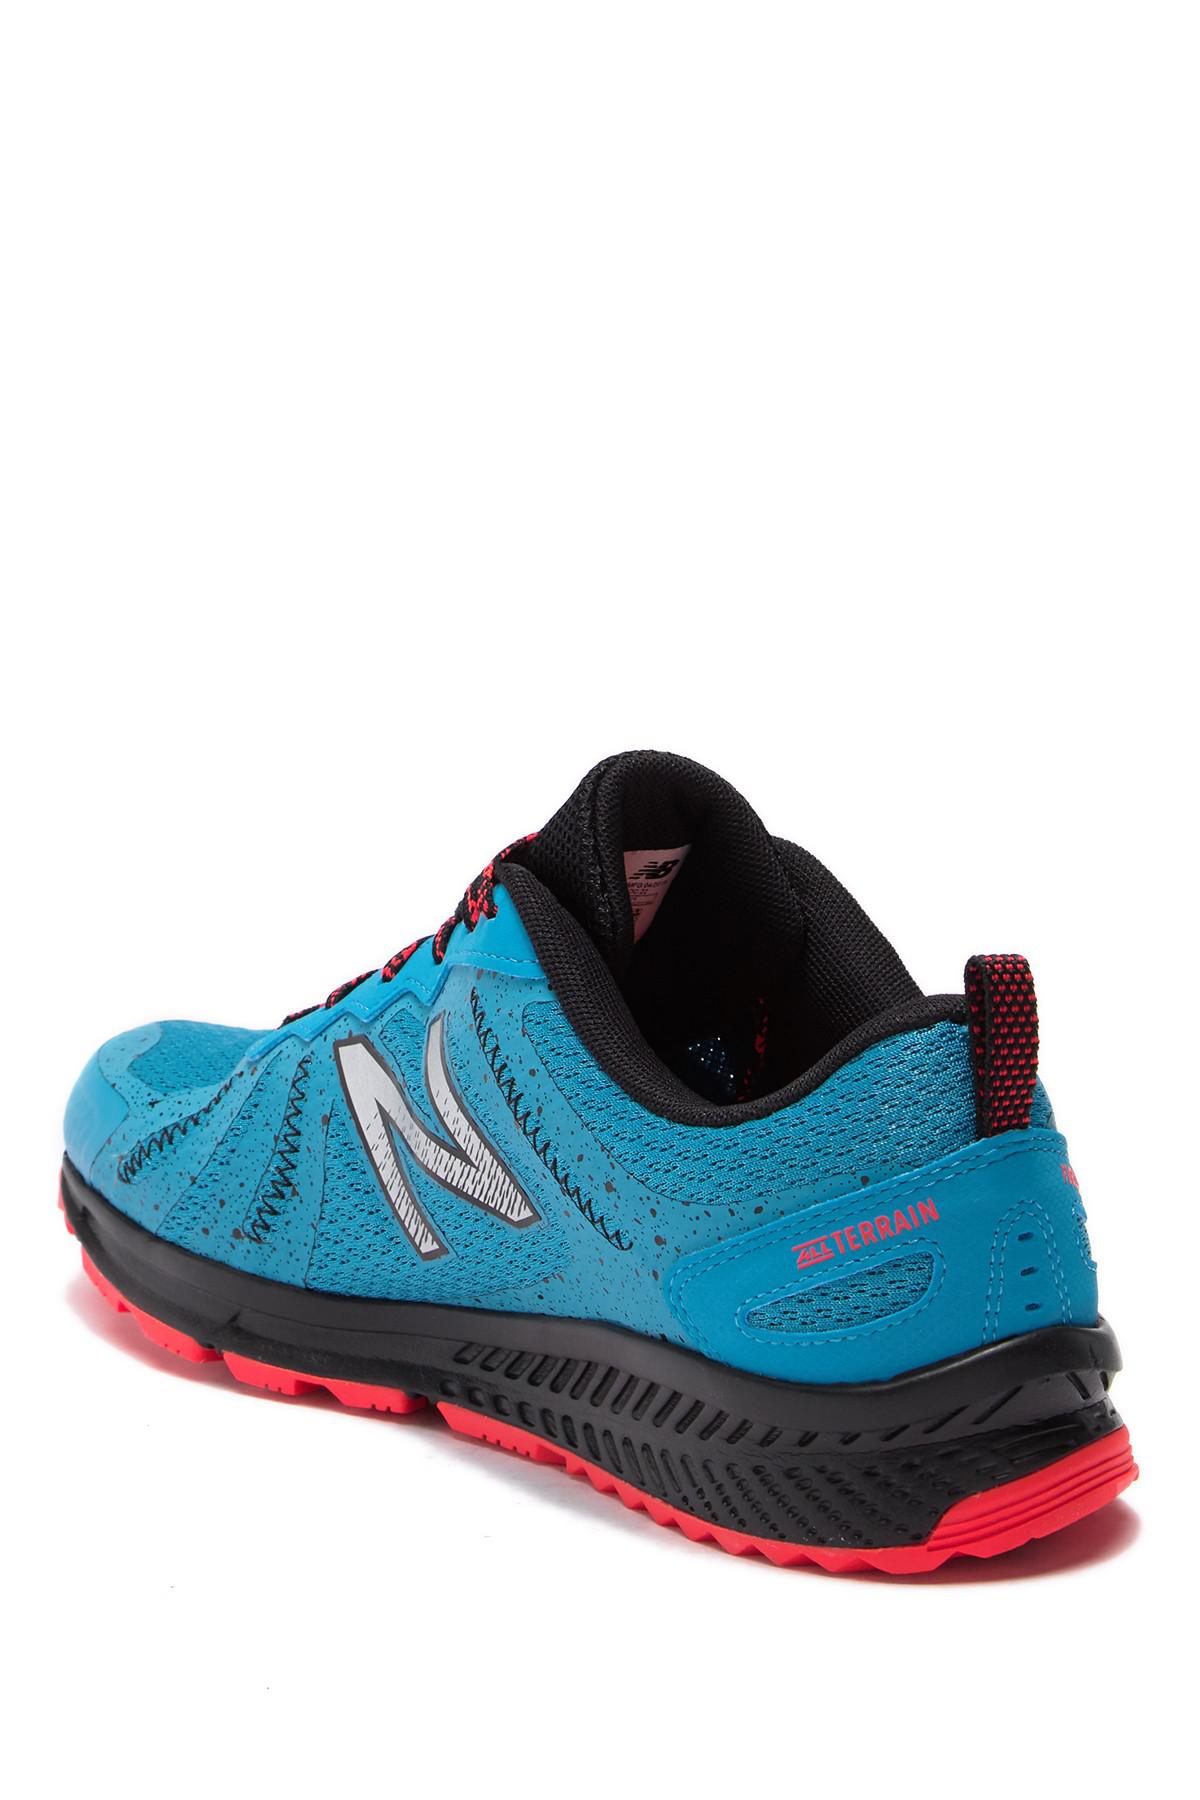 new balance fuelcore t590v4 cheap online